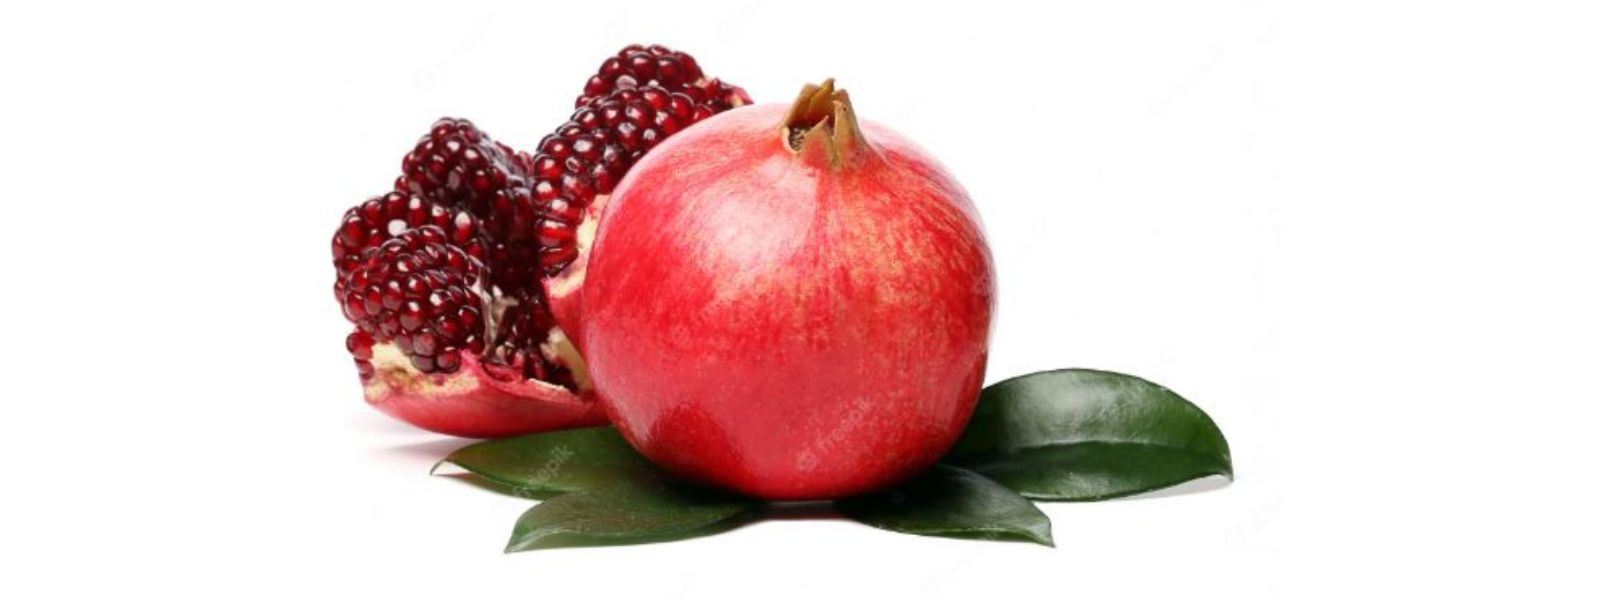 Two new varieties of Pomegranate introduced